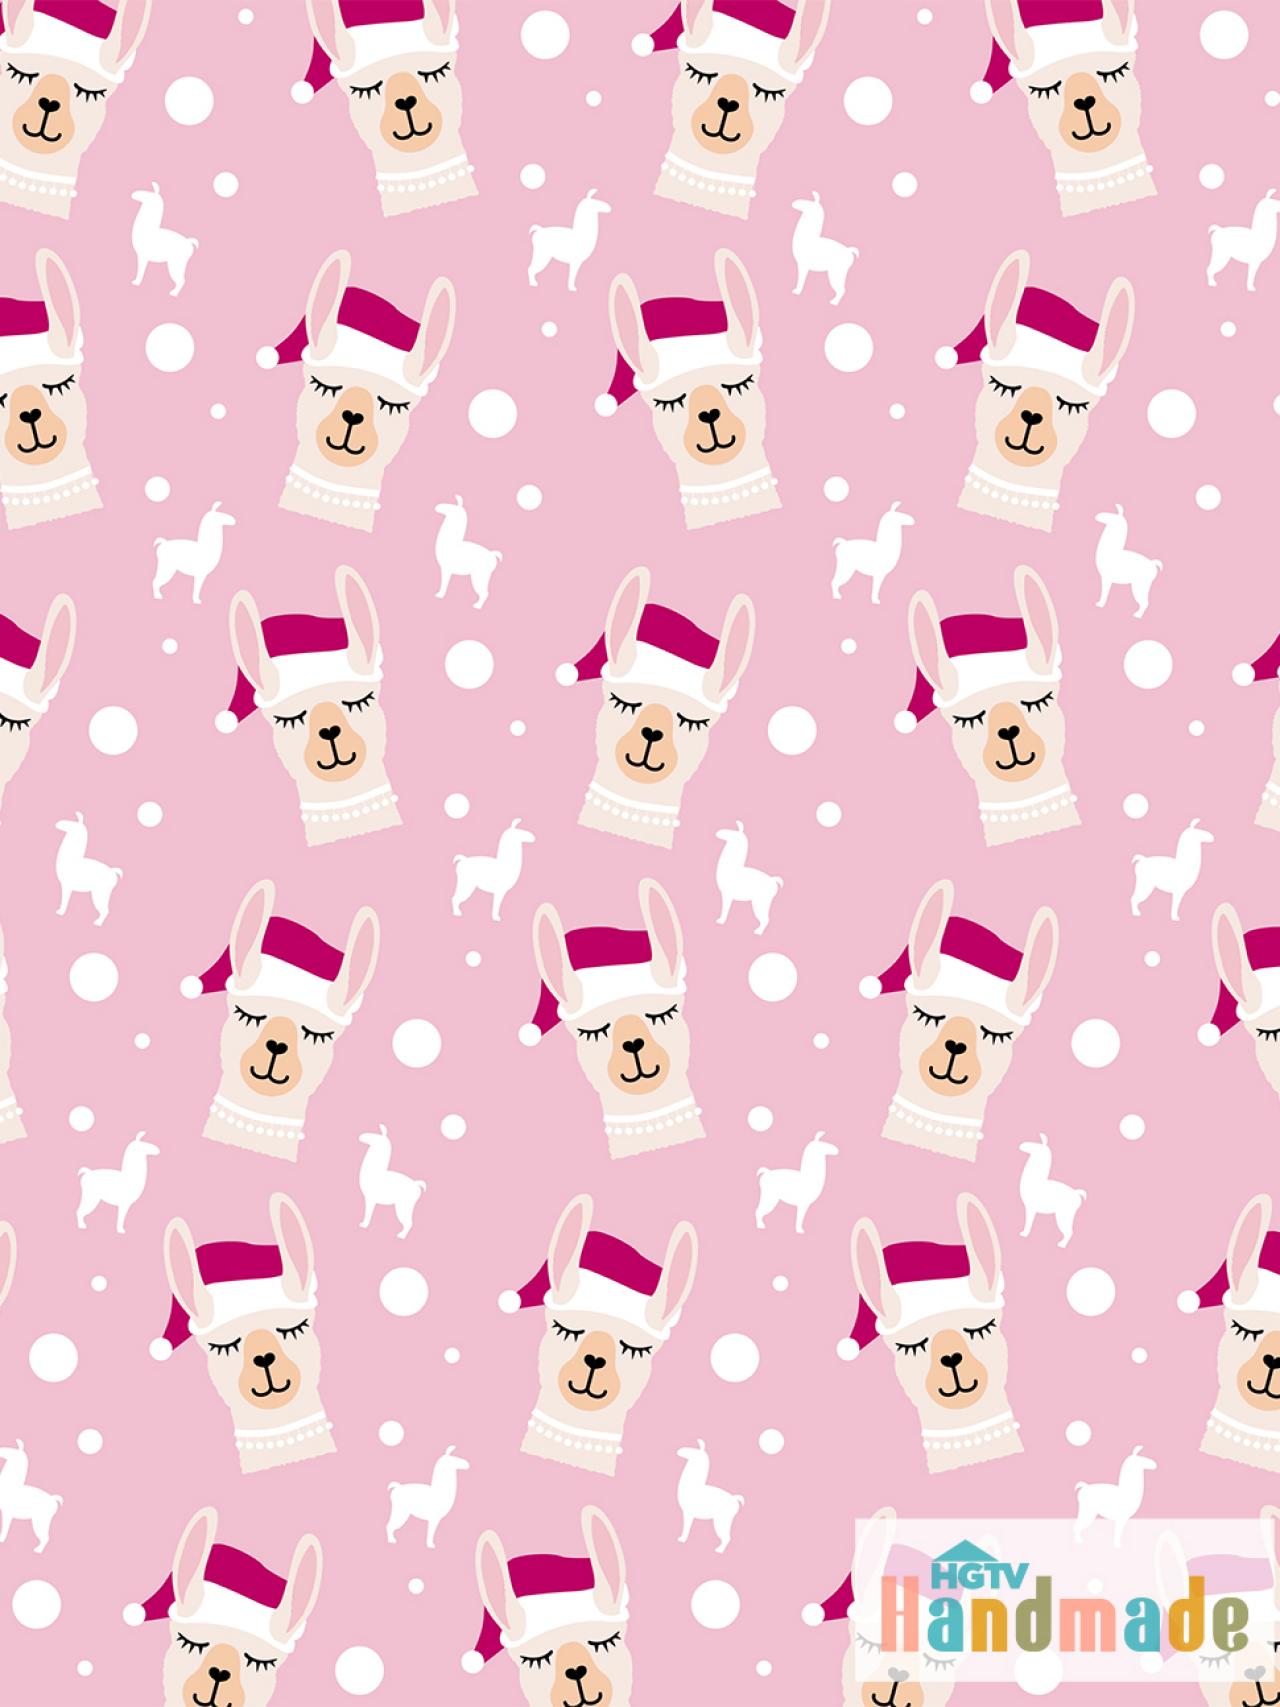 Free Printable Wrapping Paper for Christmas Gifts